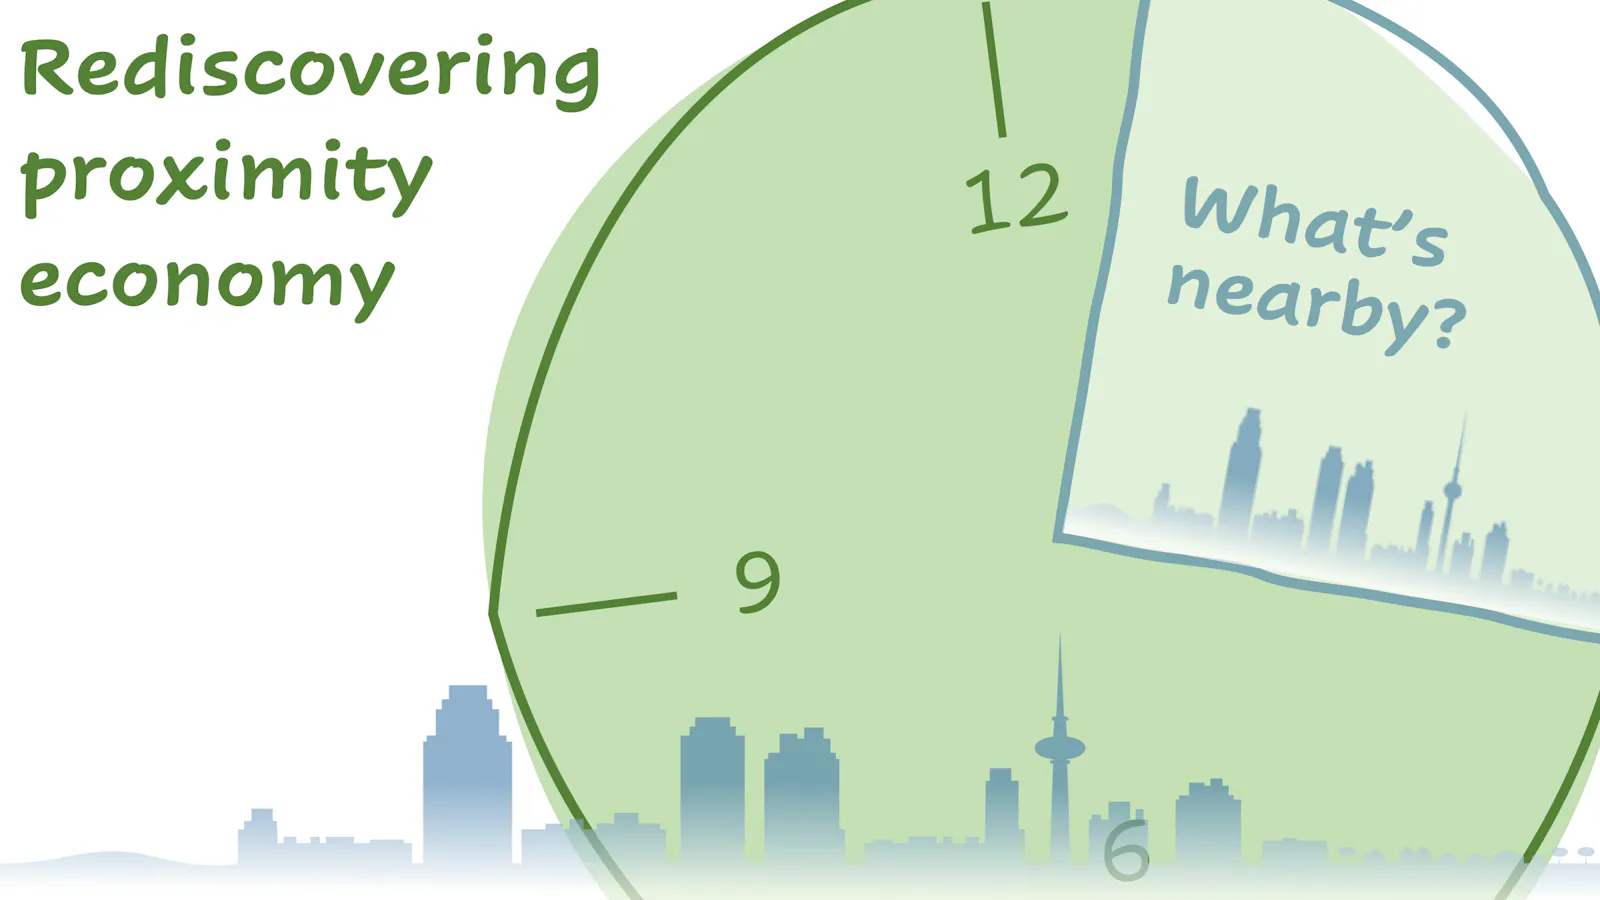 What’s nearby? Rediscovering proximity economy